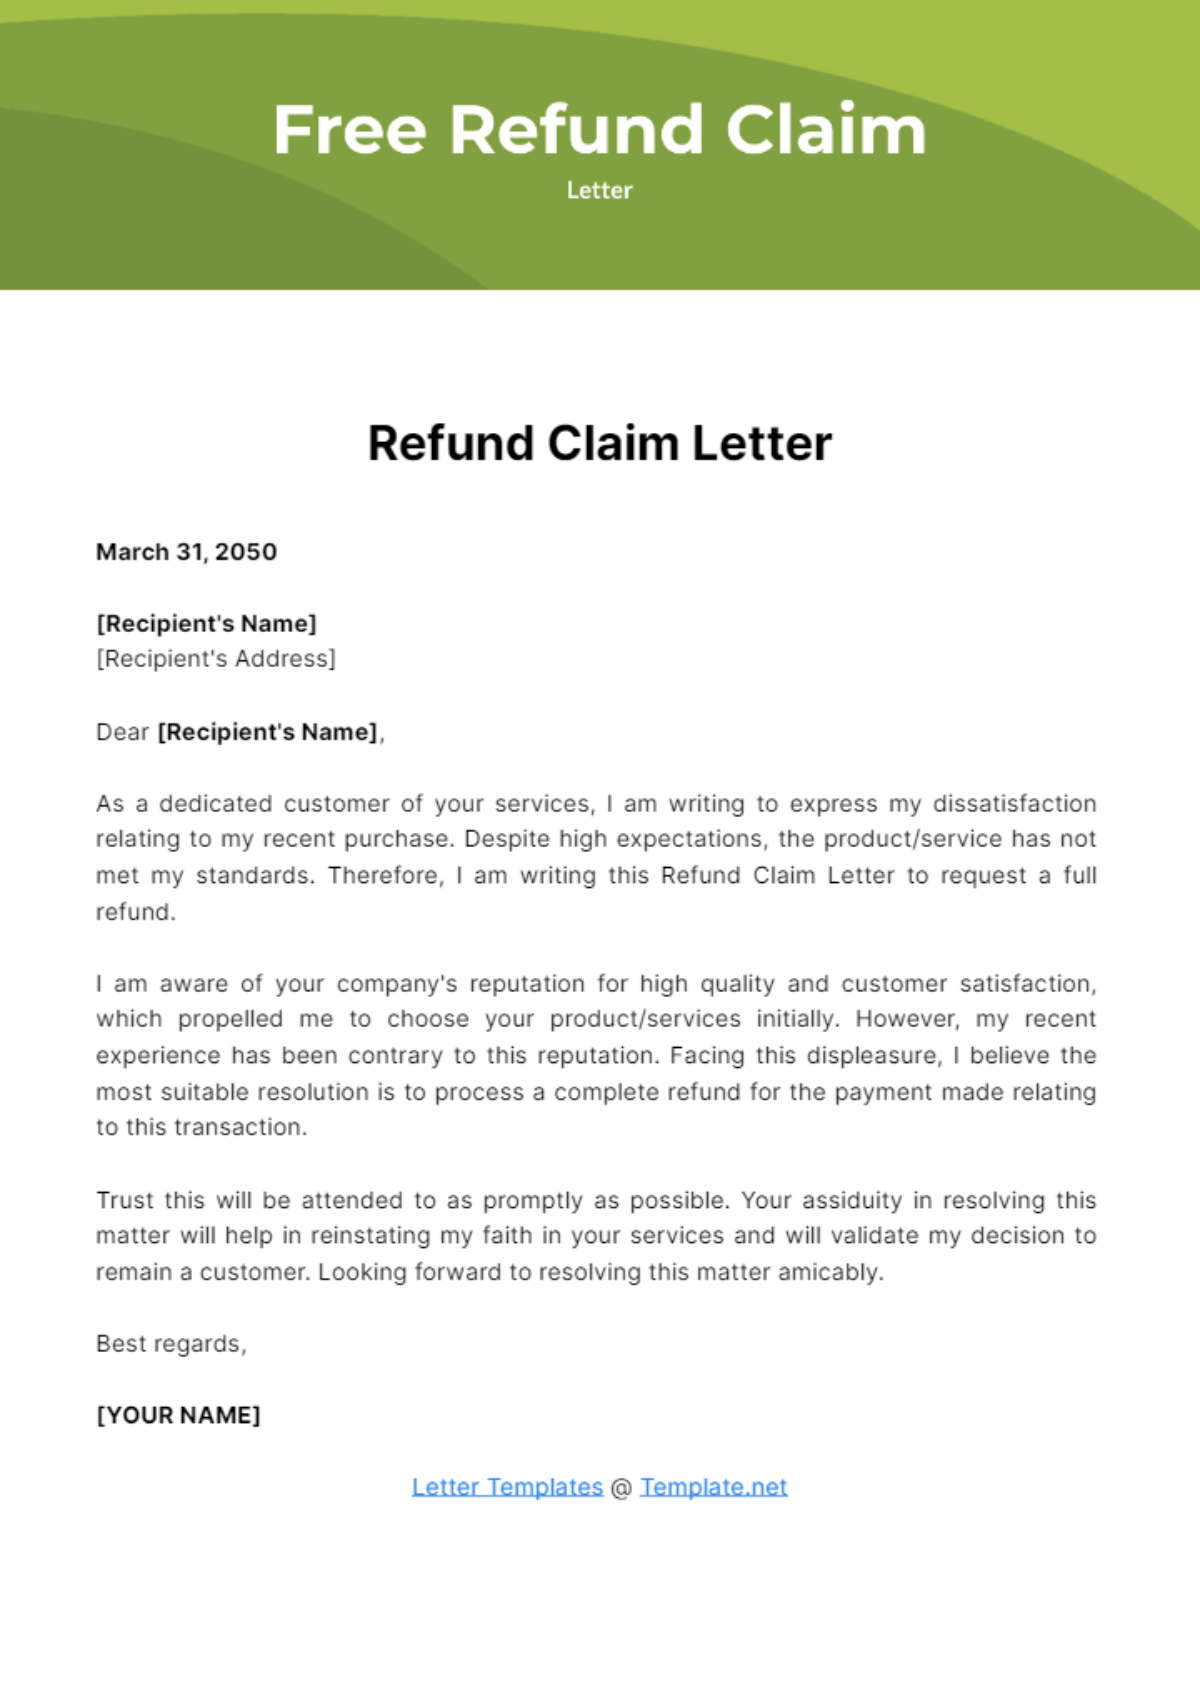 Refund Claim Letter Template